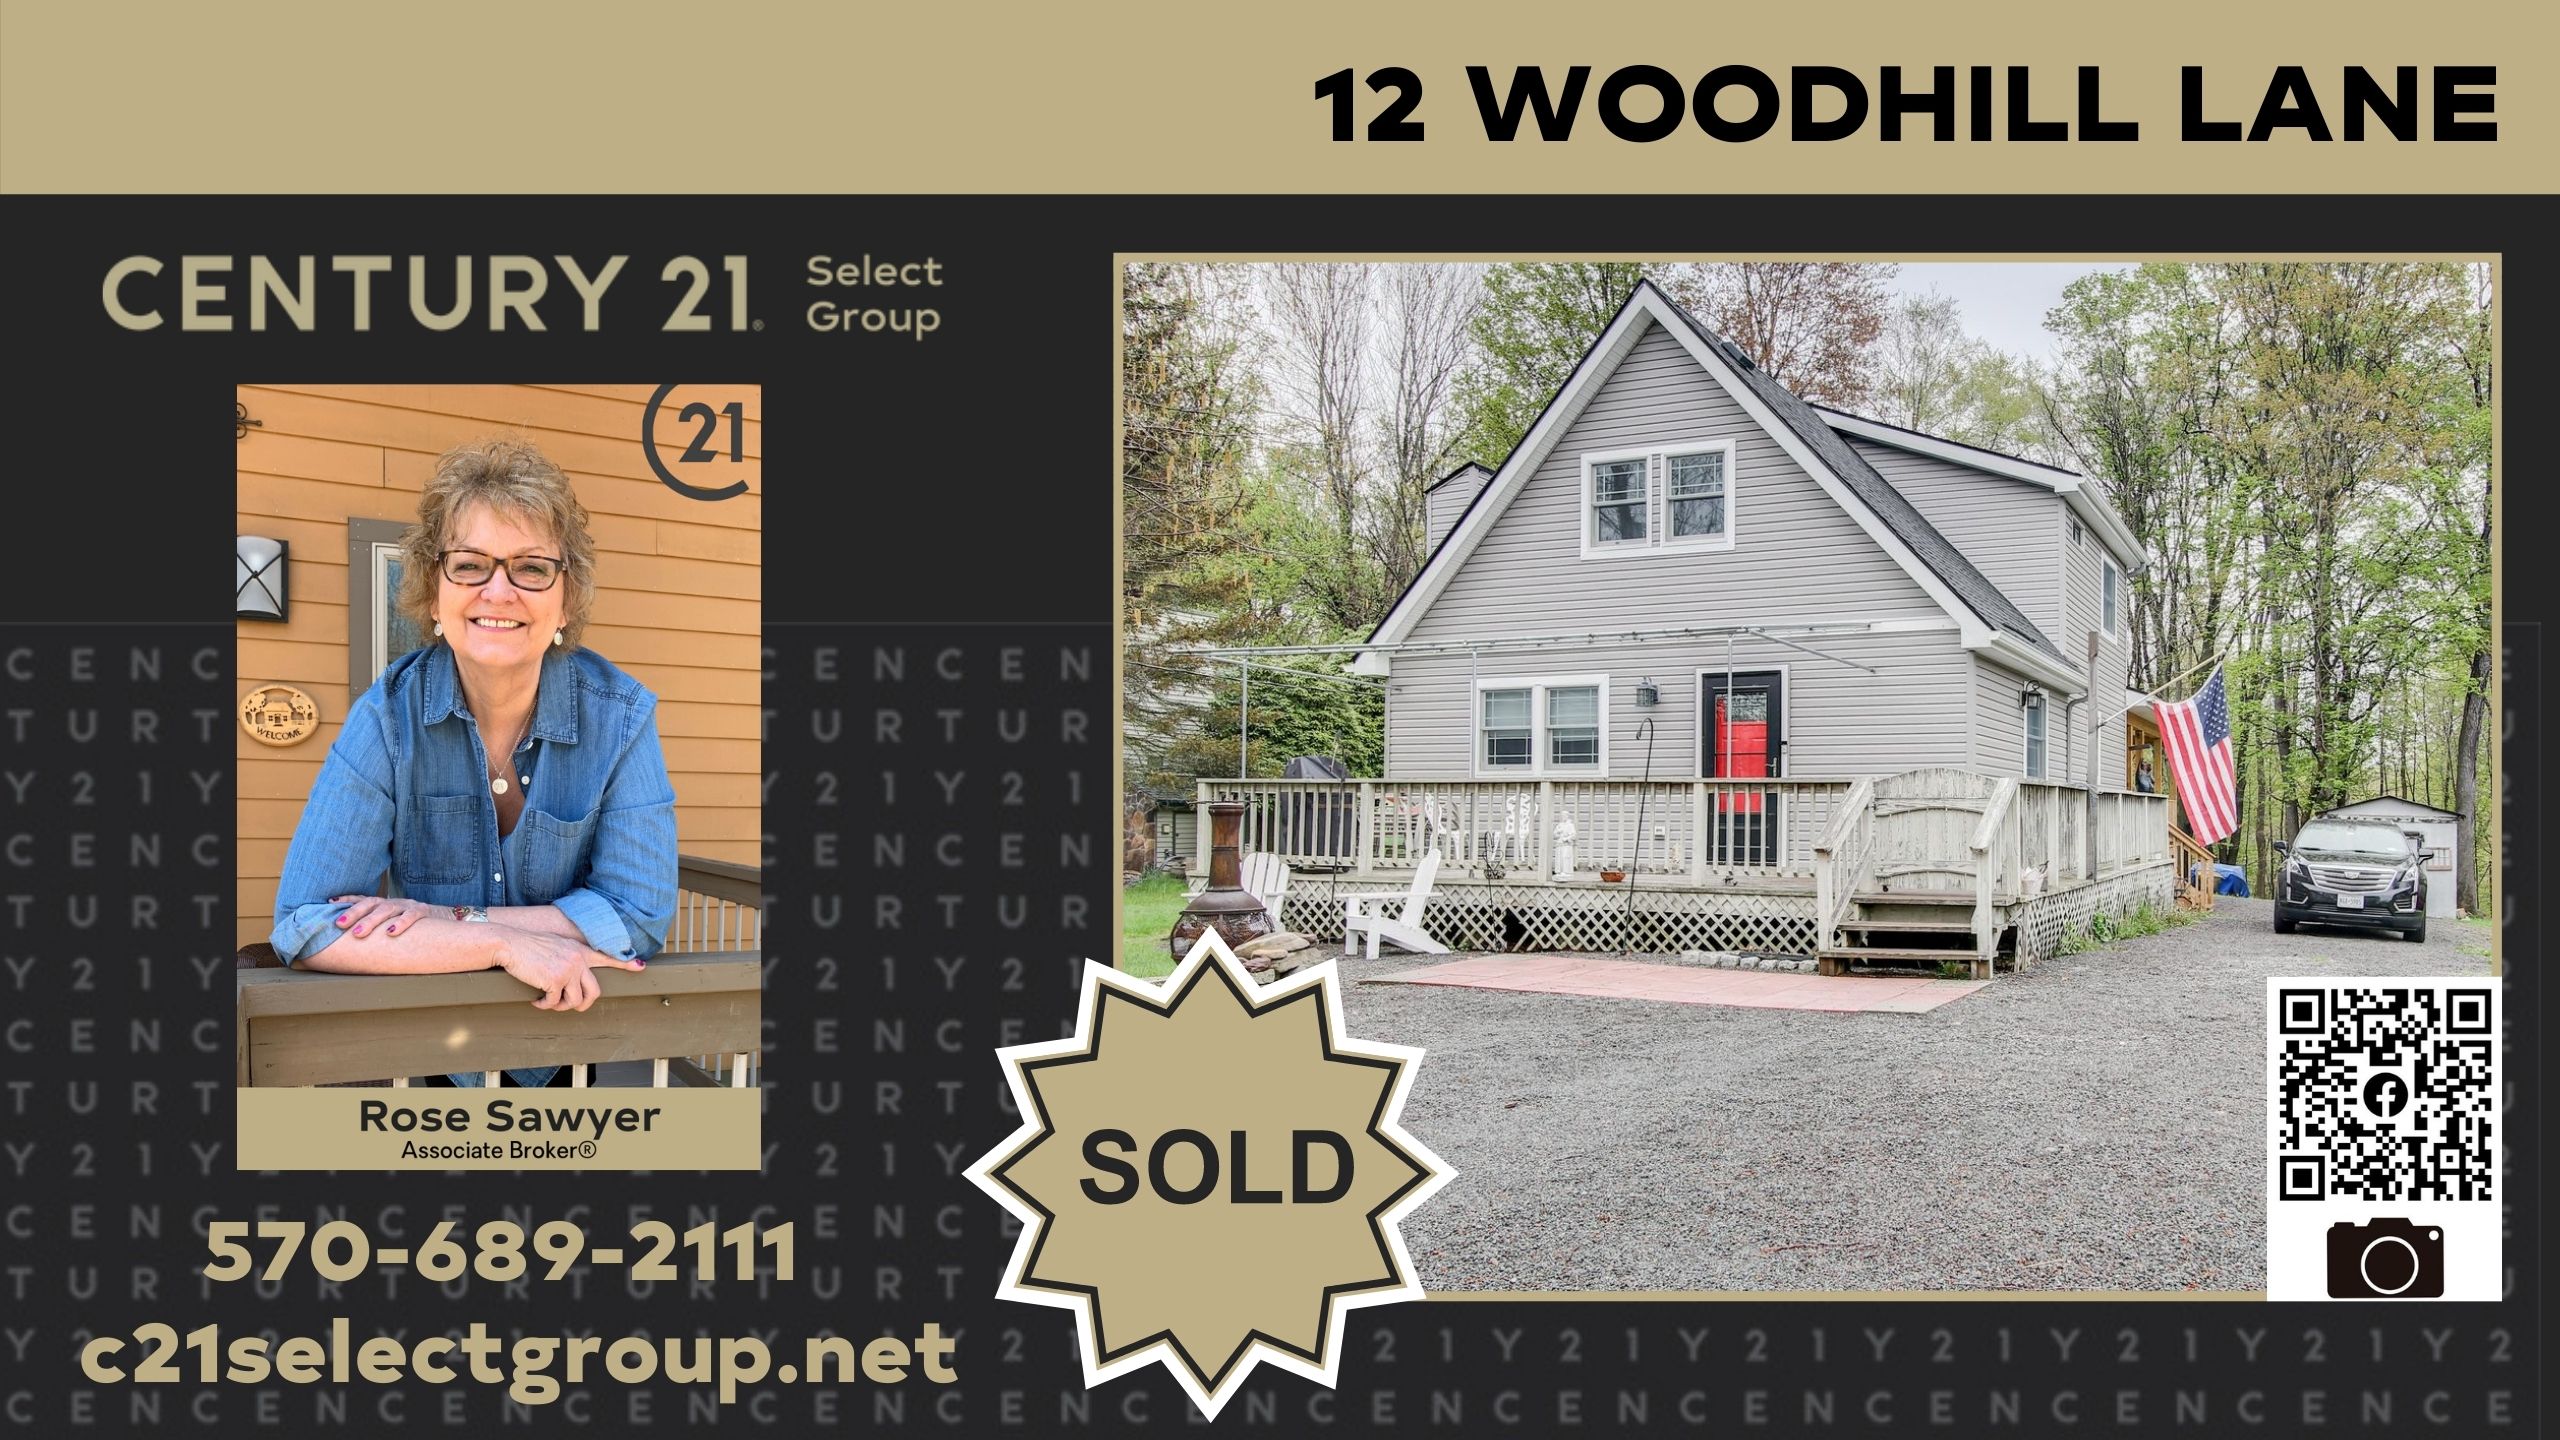 SOLD! 12 Woodhill Lane: The Hideout